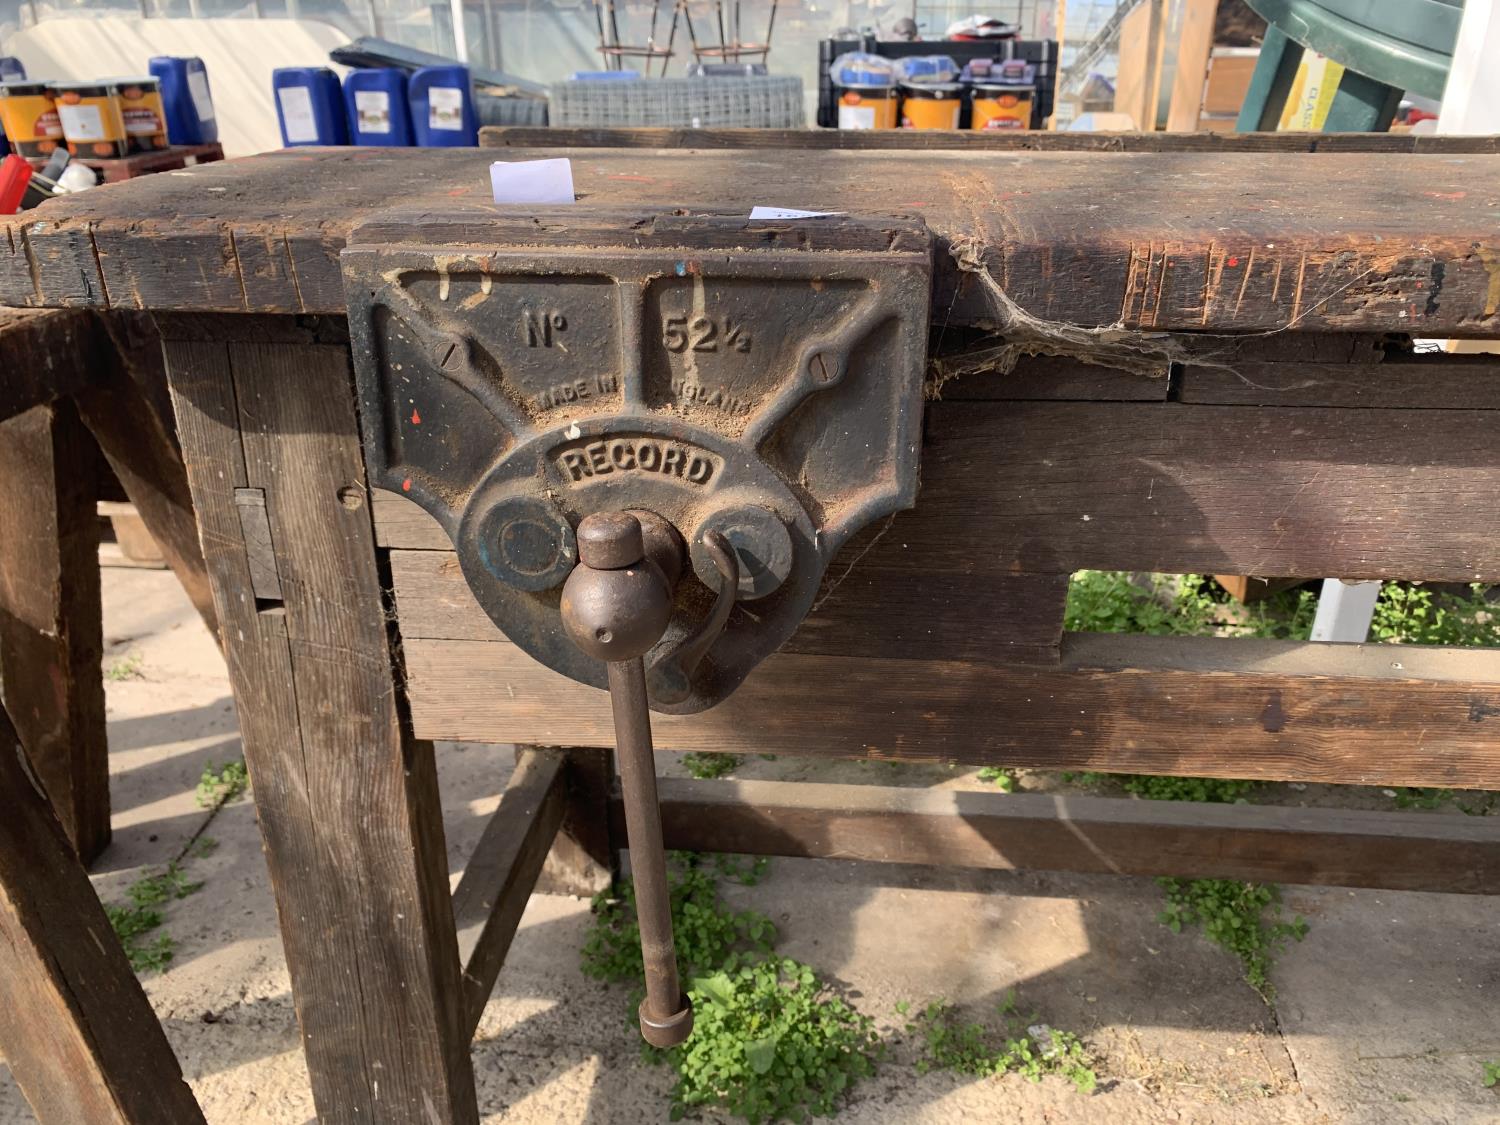 A VINTAGE WORK BENCH WITH A RECORD NO.52 BENCH VICE - Image 4 of 4